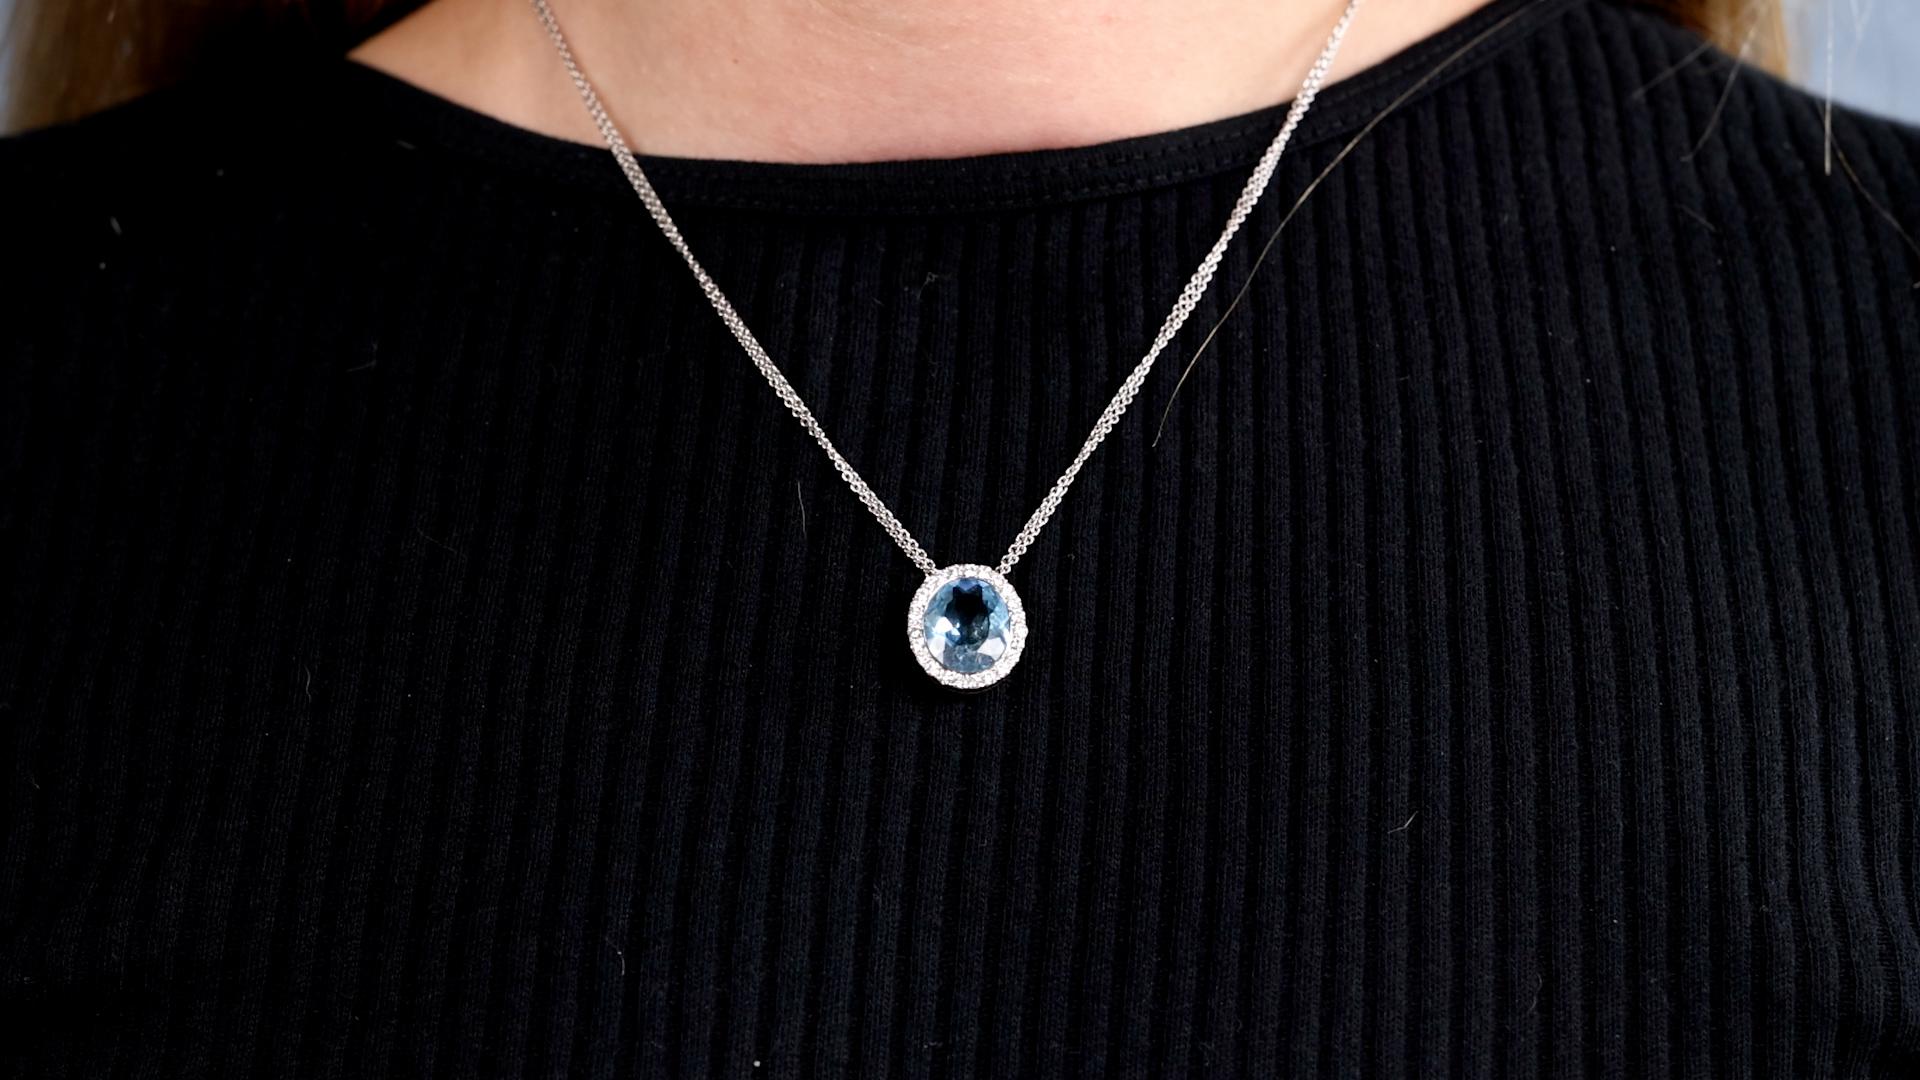 One Hans D. Krieger Aquamarine Diamond 18k White Gold Pendant Necklace. Featuring one oval brilliant cut aquamarine weighing approximately 4.20 carats. Accented by 24 round brilliant cut diamonds with a total weight of approximately 0.60 carat,